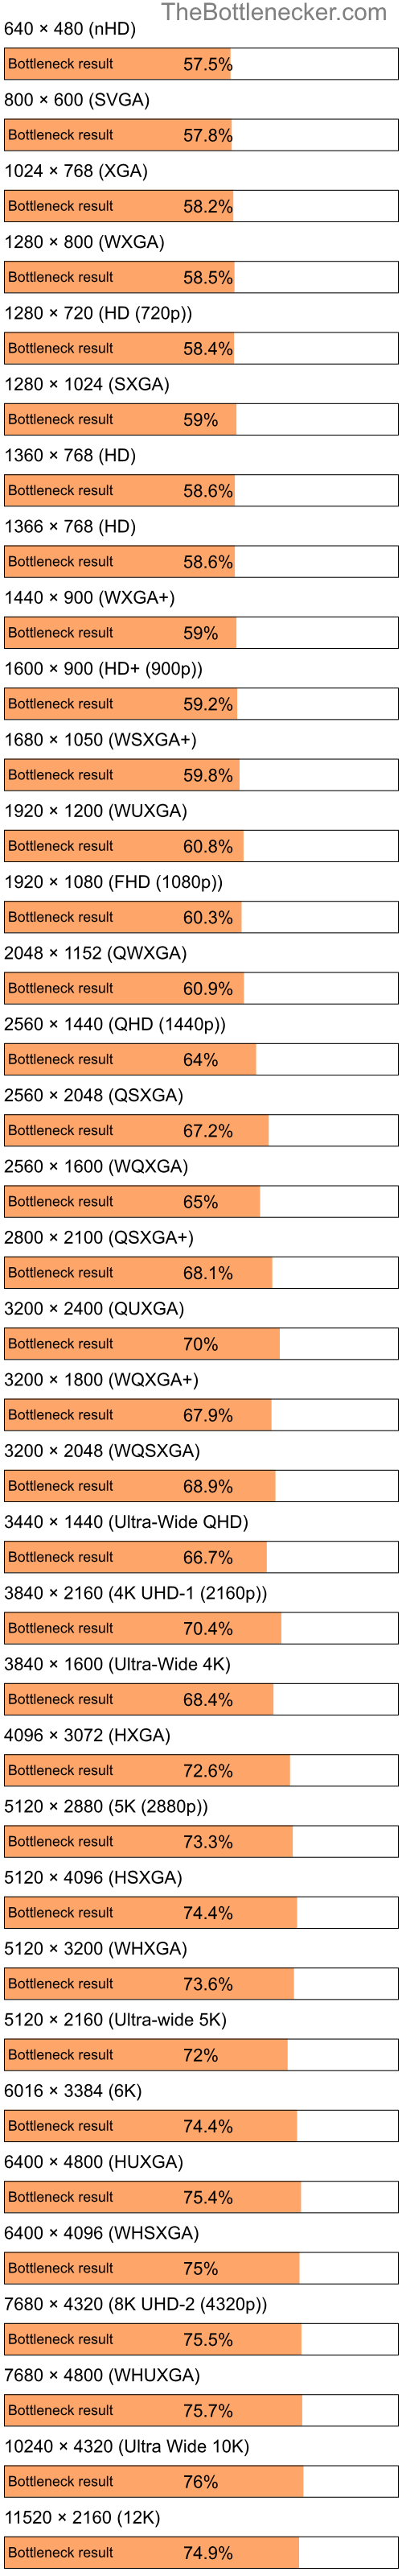 Bottleneck results by resolution for Intel Atom N270 and AMD Mobility Radeon 4100 in Processor Intense Tasks